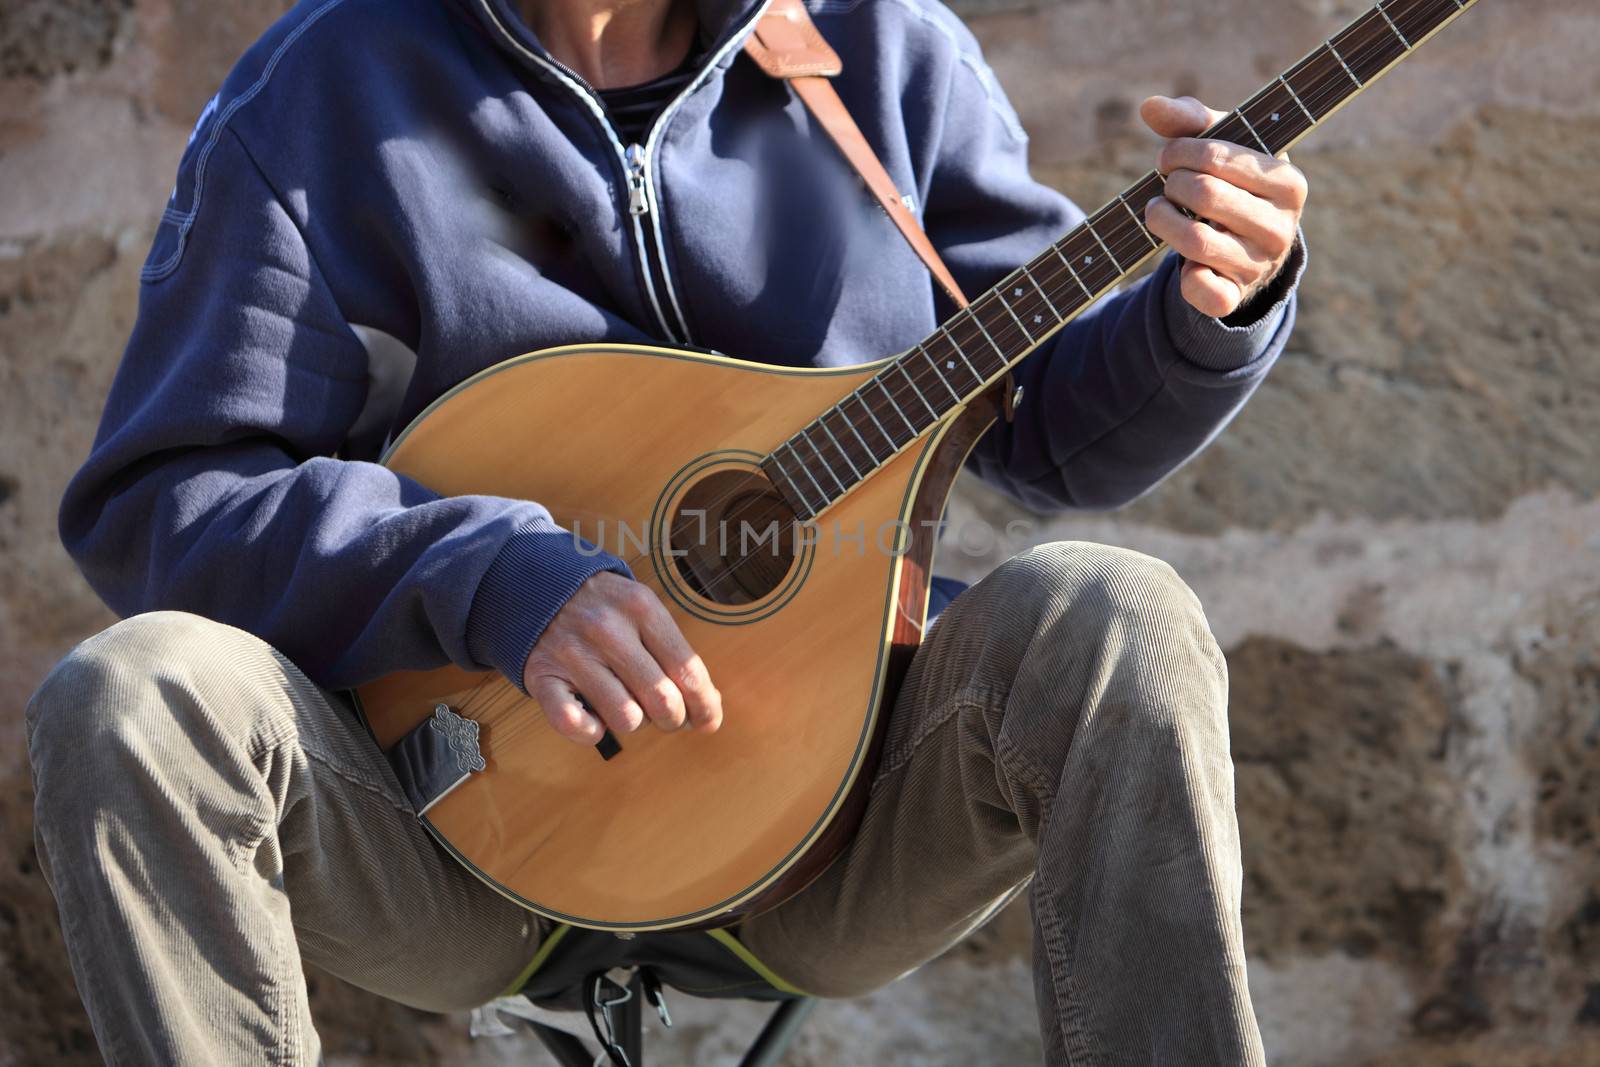 Closep of a man playing a mandolin plucking the strings while sitting in the street